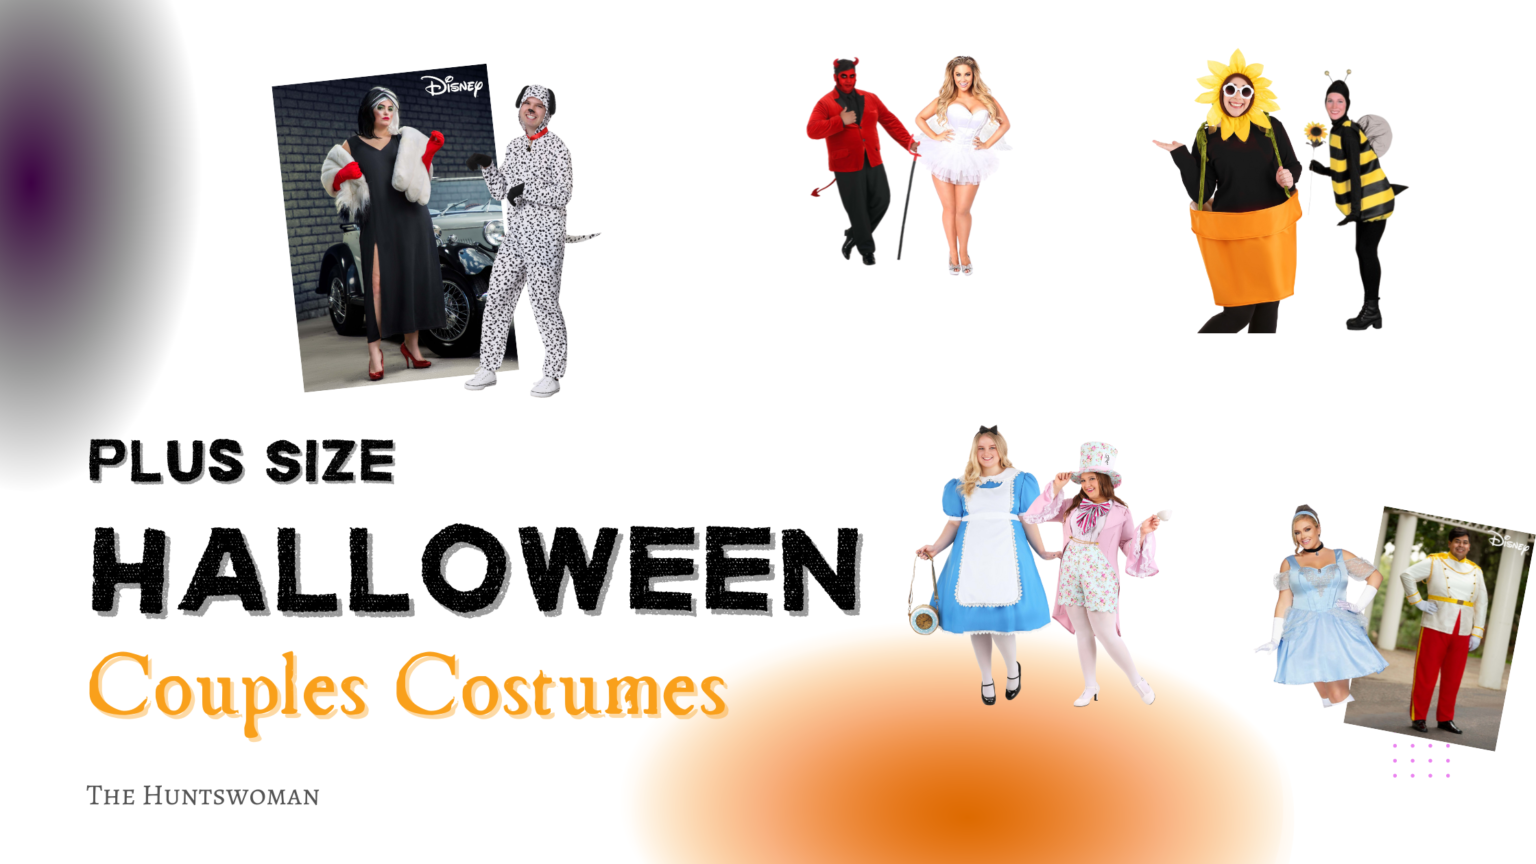 Plus Size Couples Costumes For Halloween 19 Of My Best Plus Size Couple Costume Ideas 6967